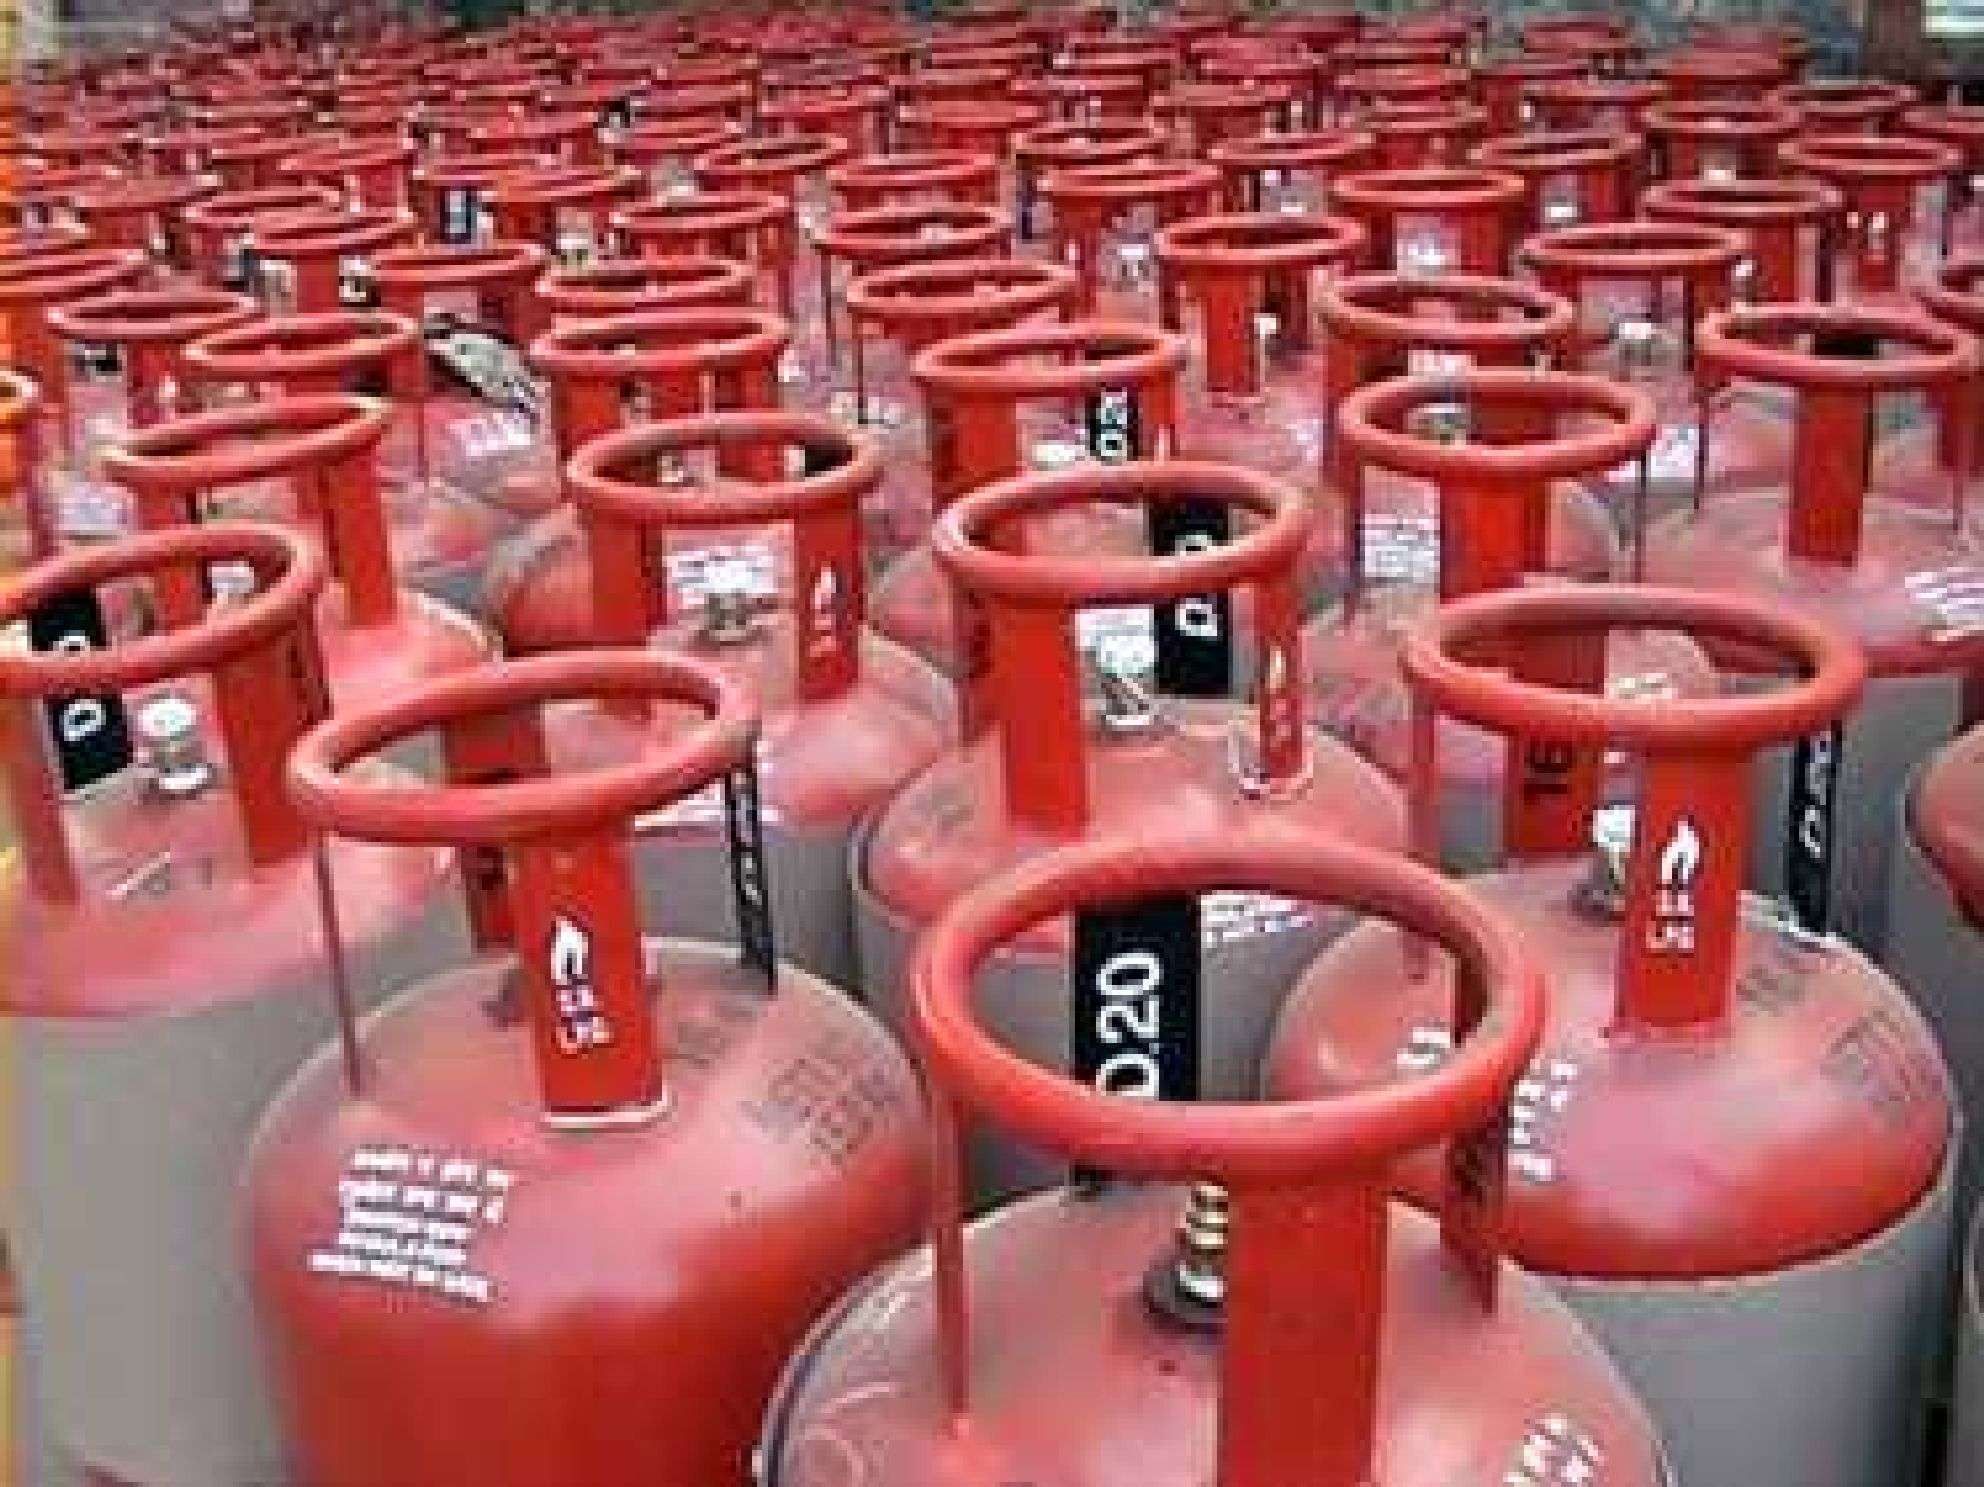 Government is giving tremendous earning opportunity through LPG gas cylinders, one lakh centers will open in the country 1